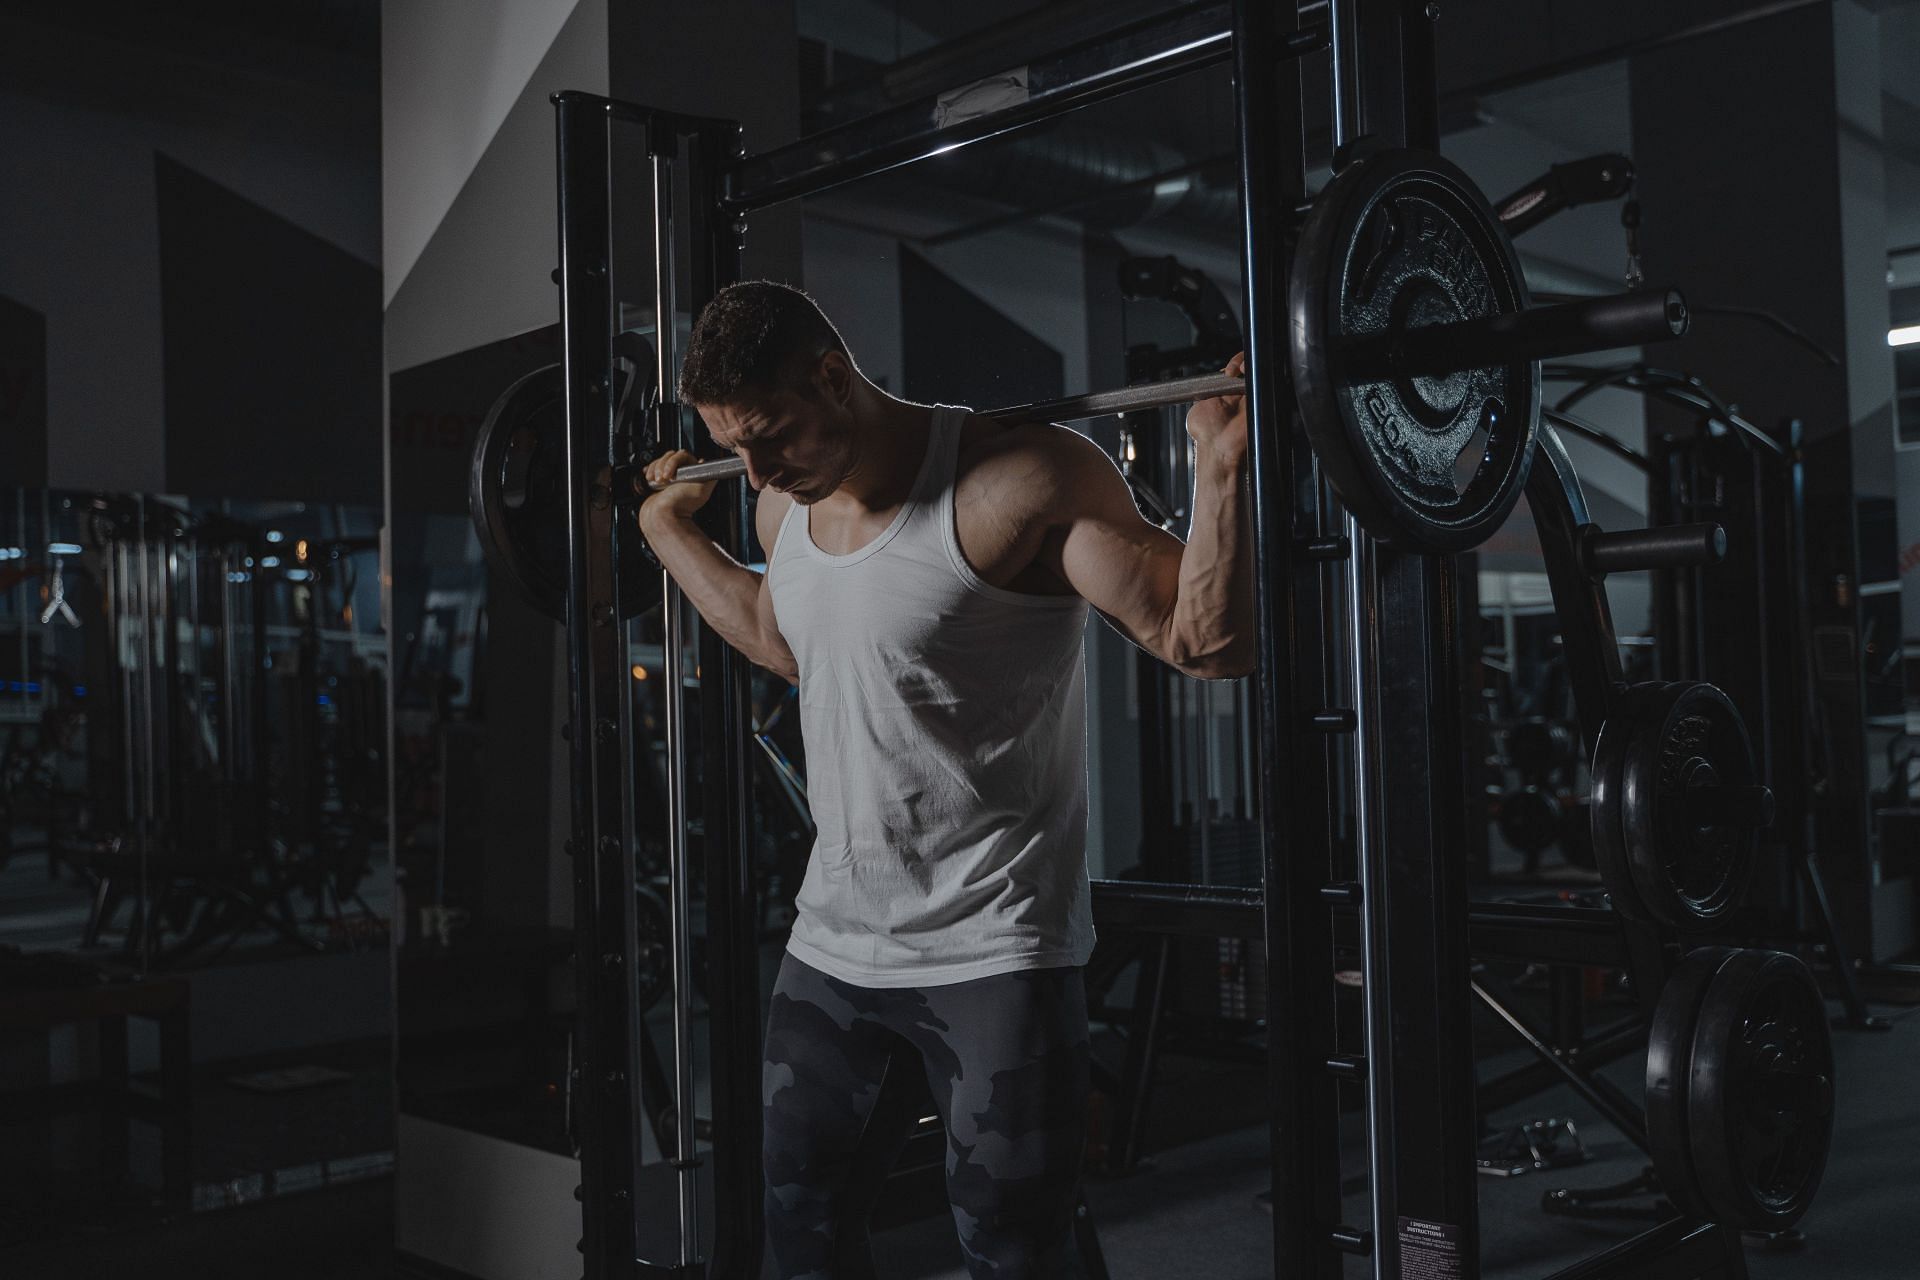 Improved bone strength, heart health, blood sugar levels and even brain function are benefits of lifting weights. (Image via Pexels/Tima Miroshnichenko)